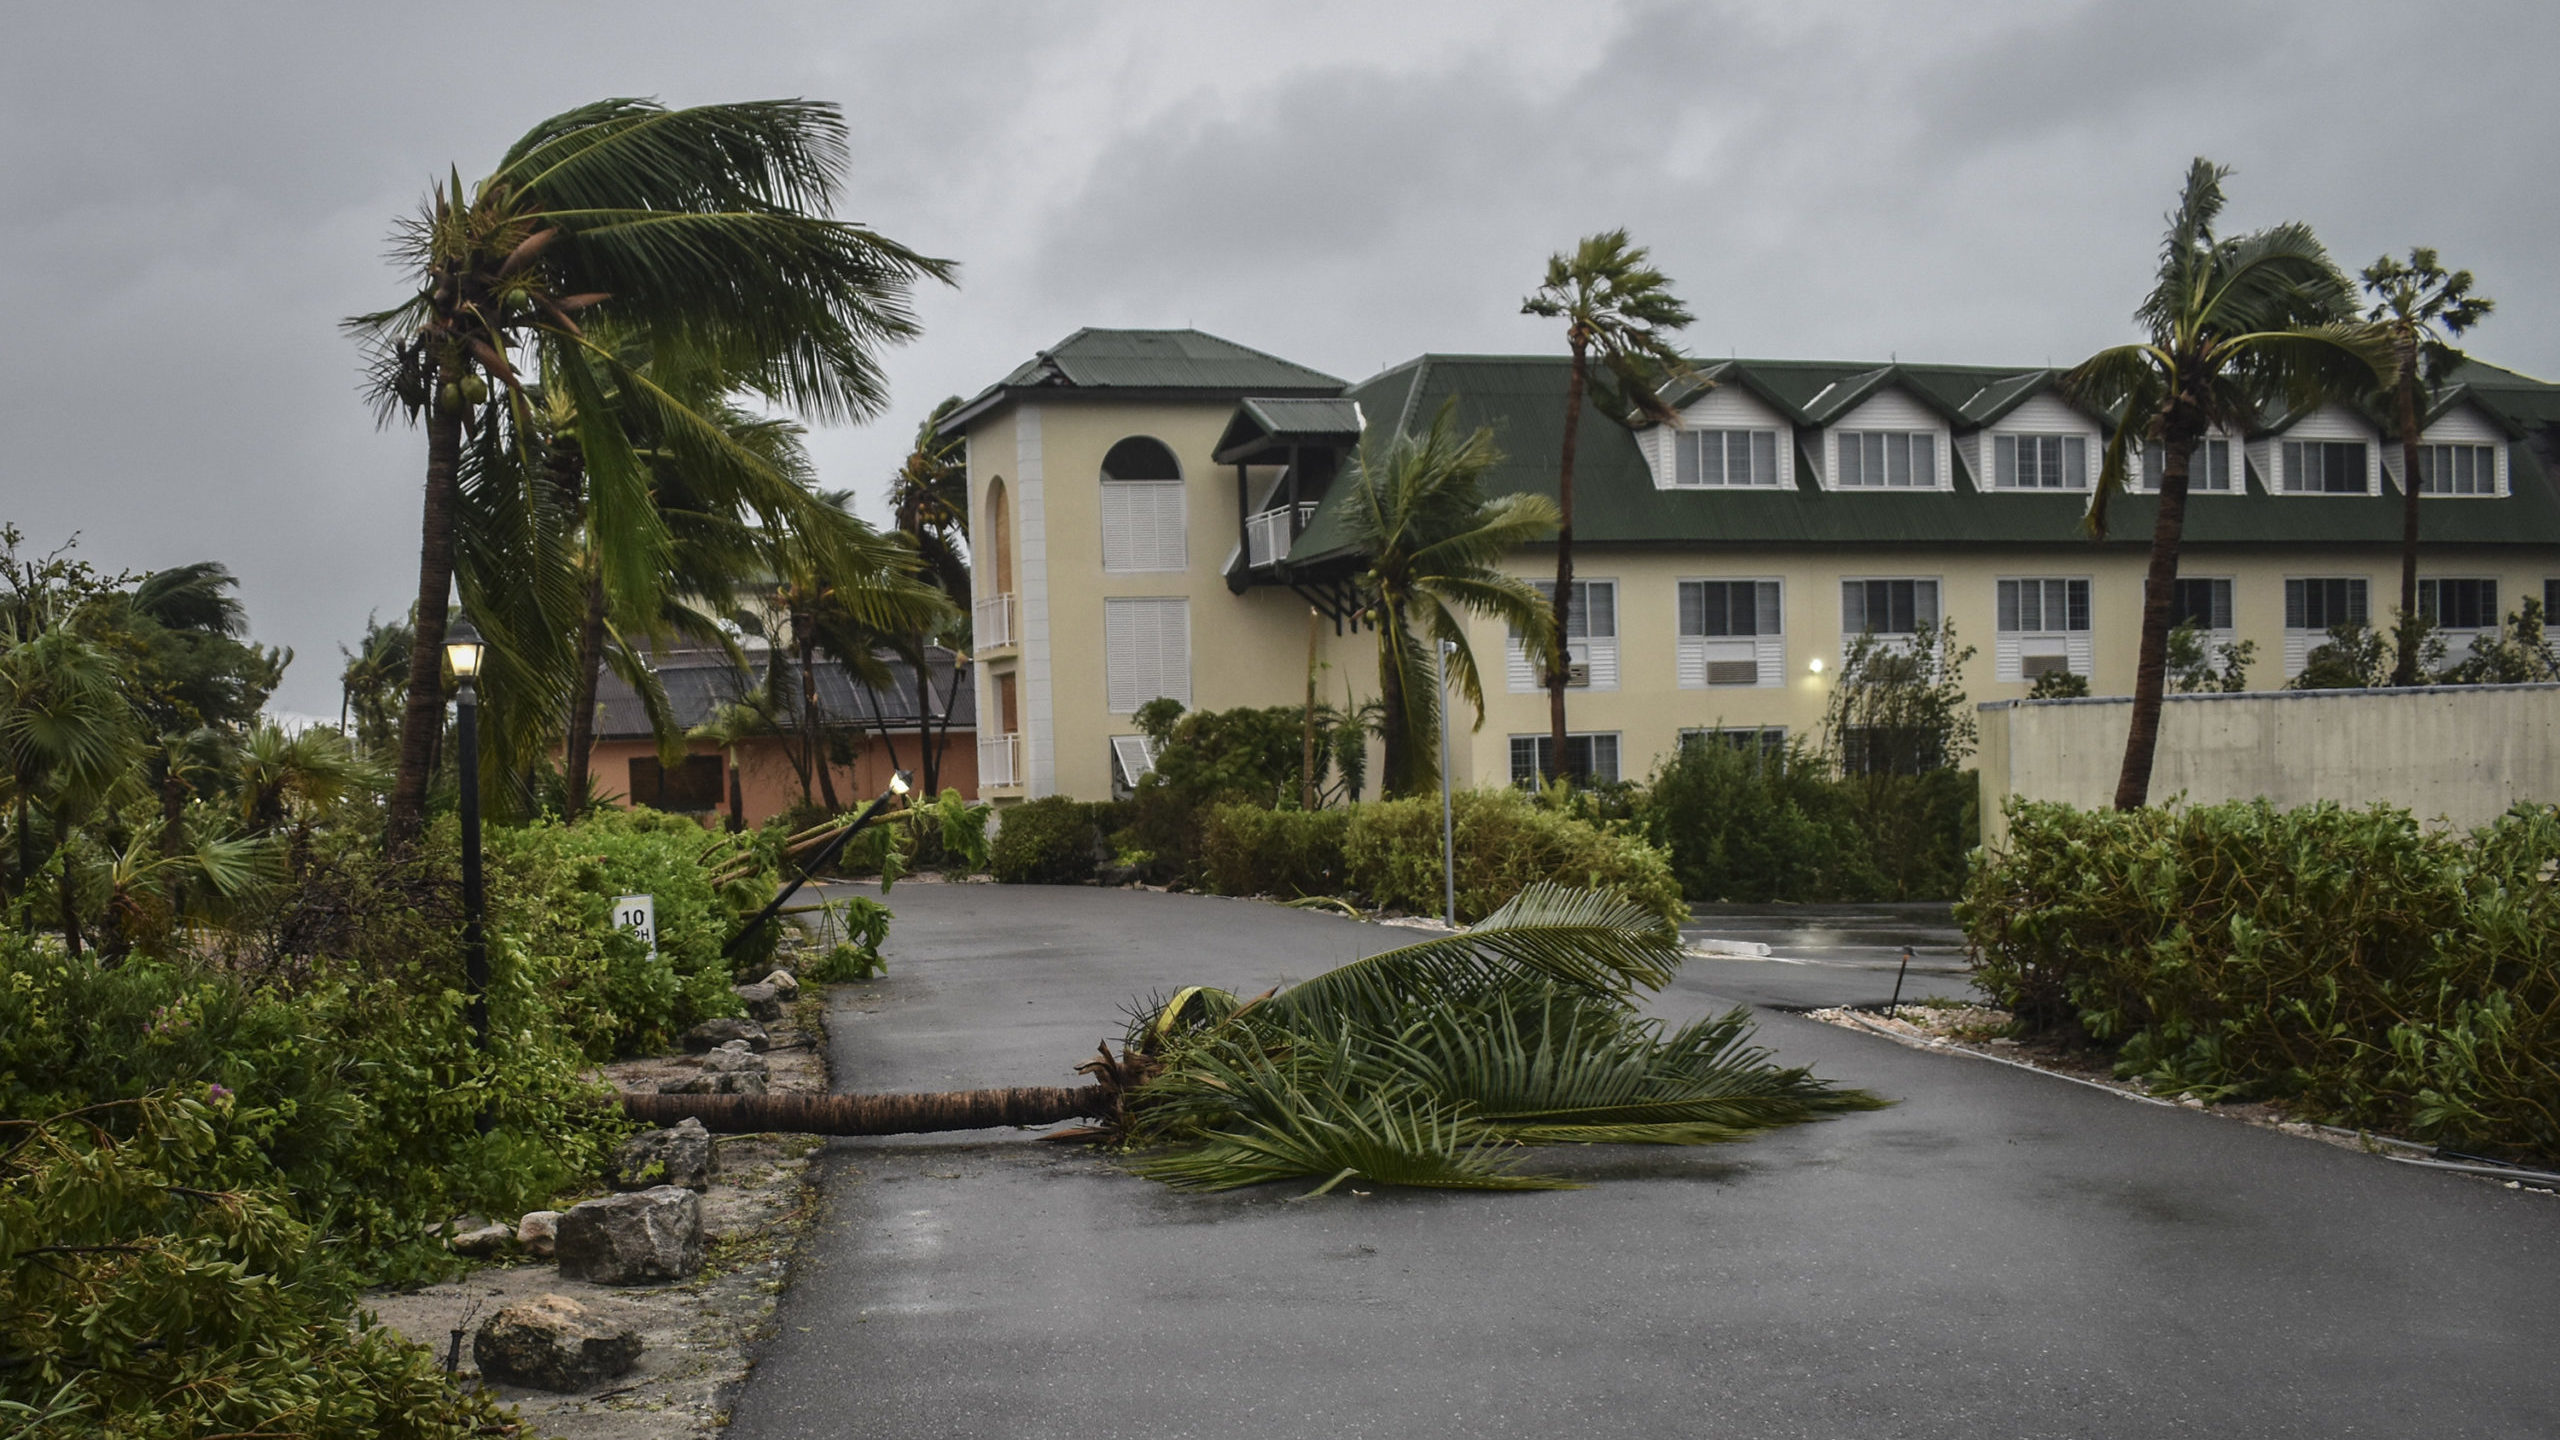 Fallen palm trees lay over the Ports of Call Resort entrance after the passage of Hurricane Fiona i...